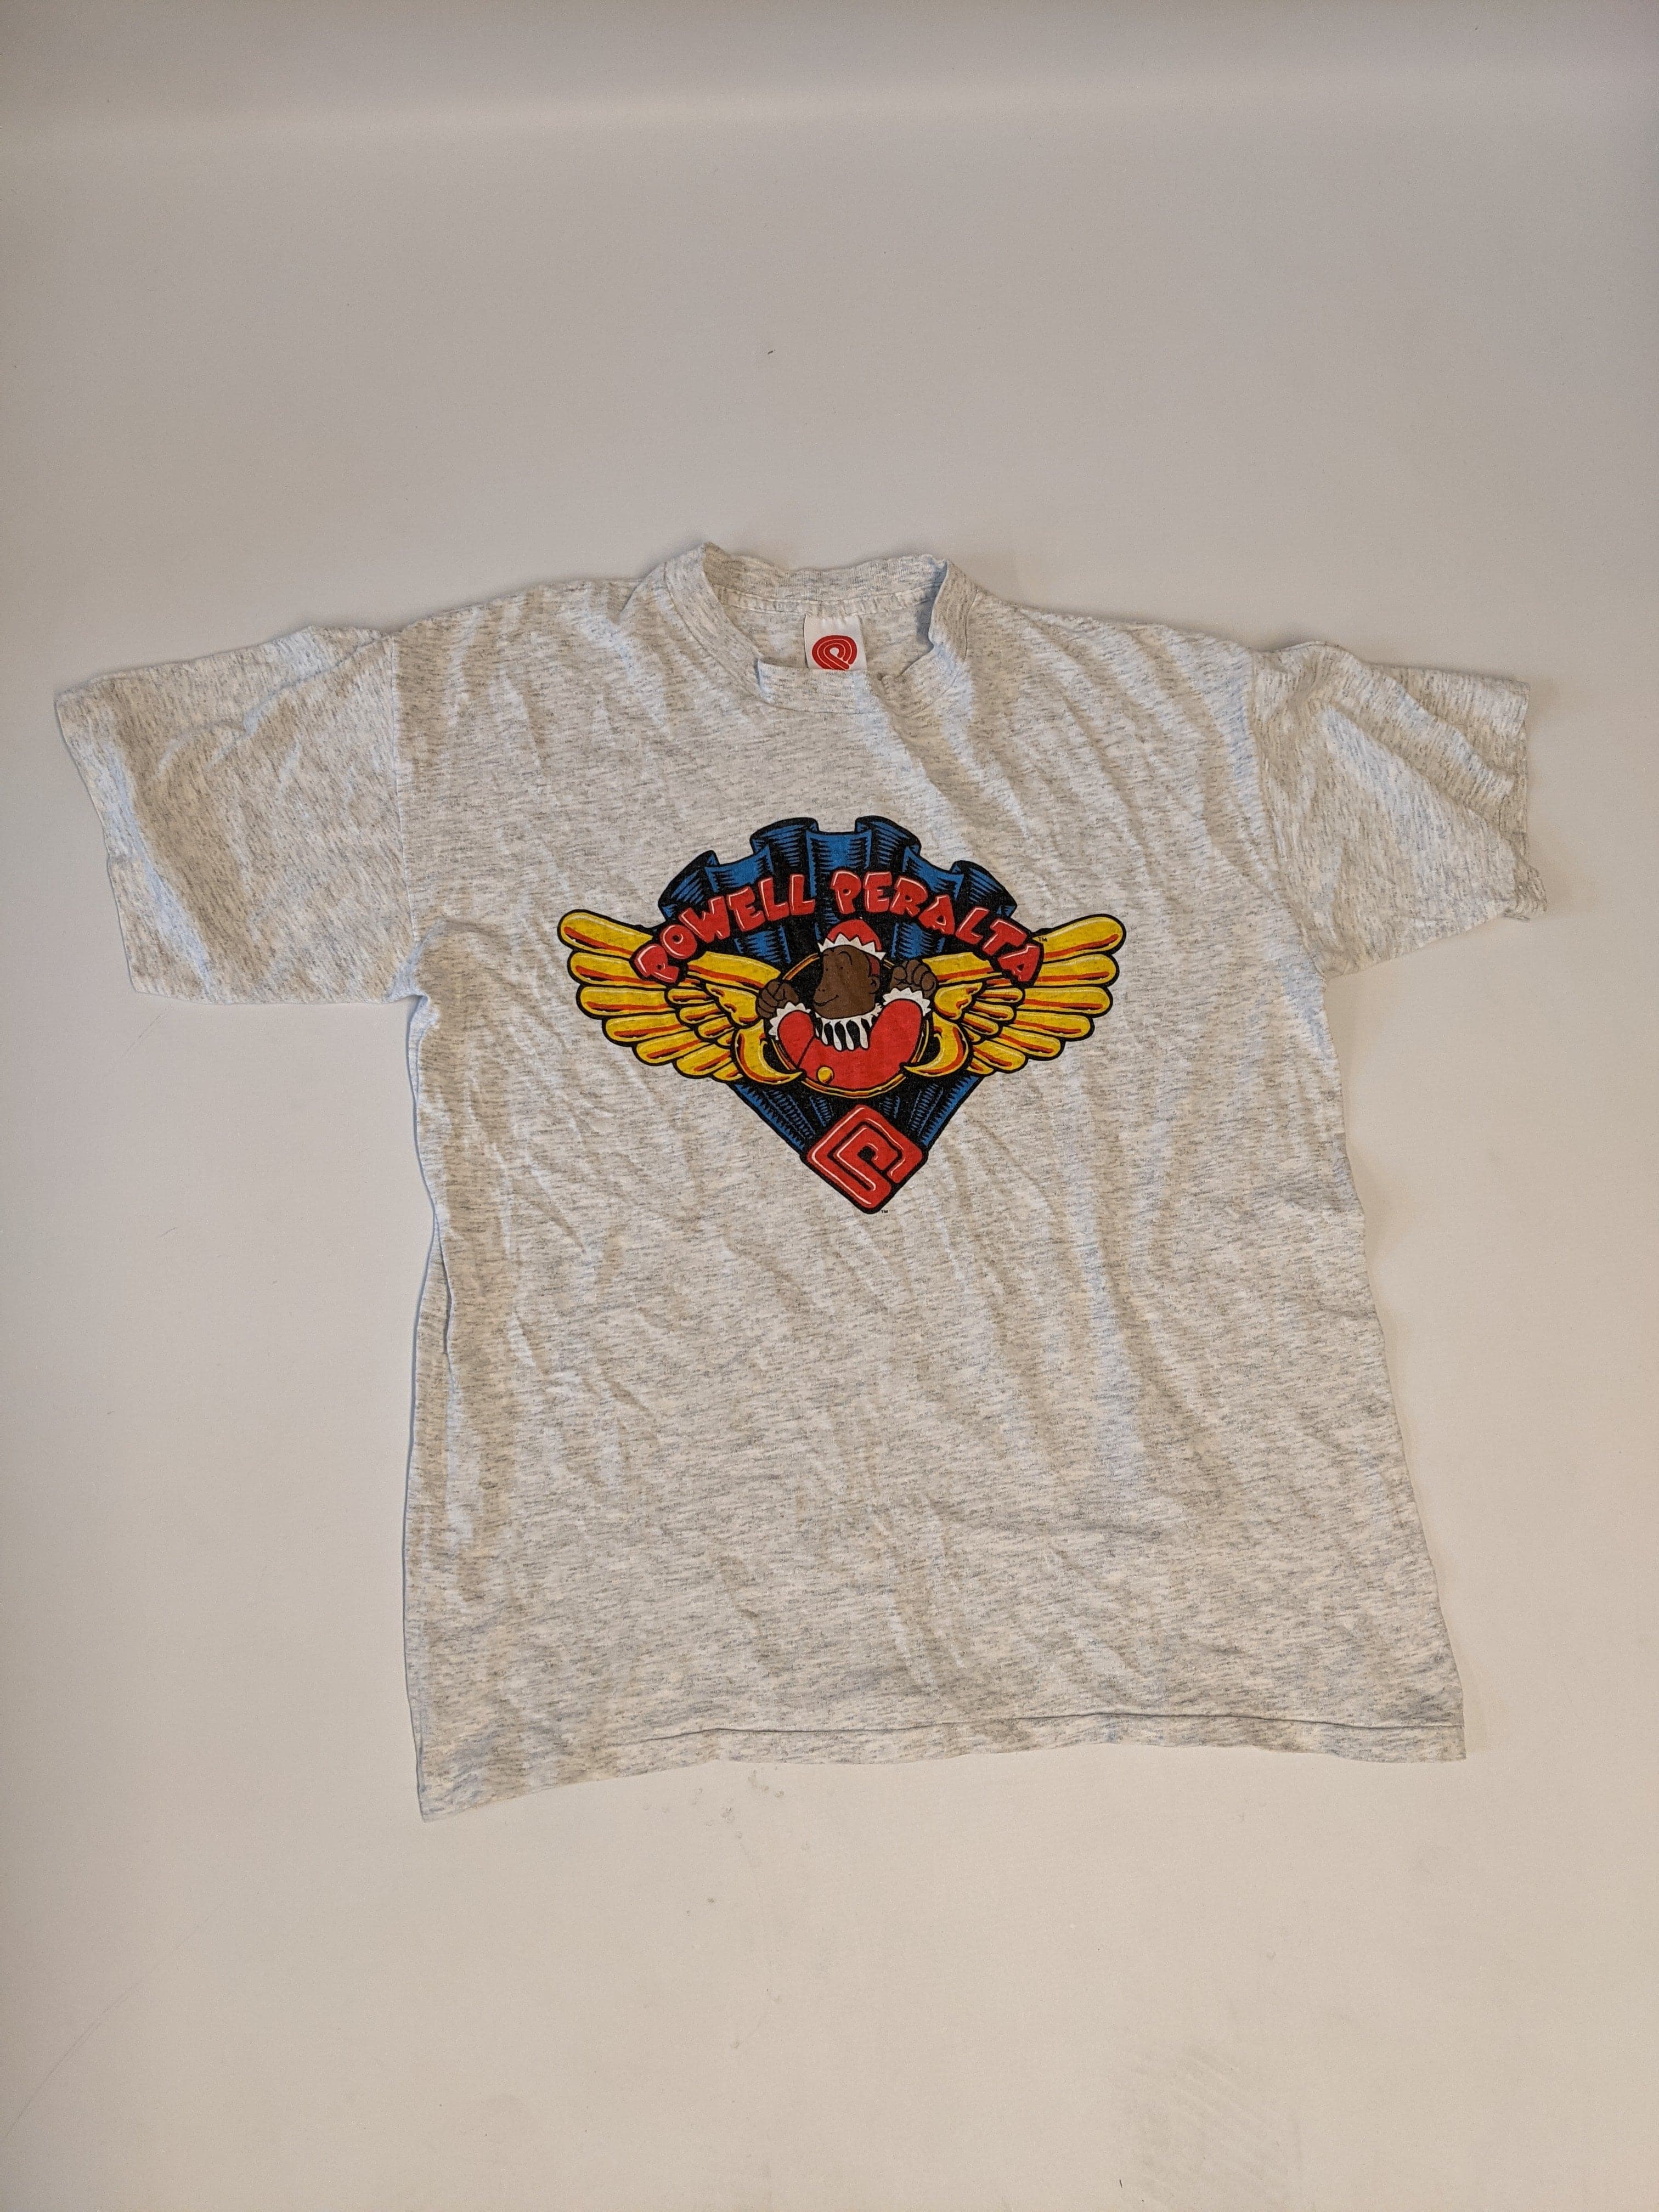 Powell Peralta 'Monkey' T-Shirt Made in USA VINTAGE 90s L ...